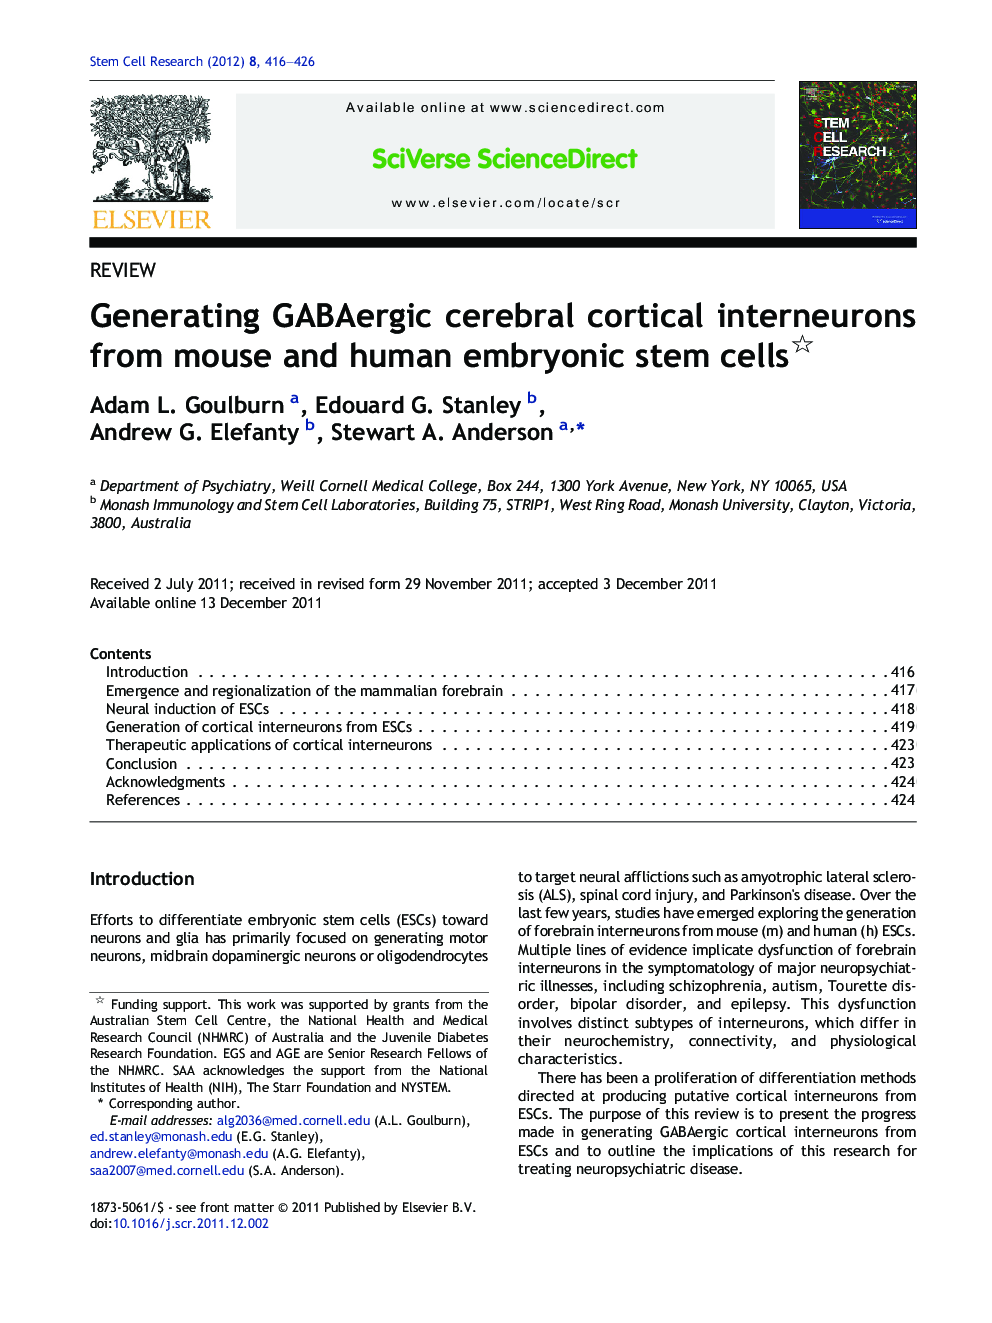 Generating GABAergic cerebral cortical interneurons from mouse and human embryonic stem cells